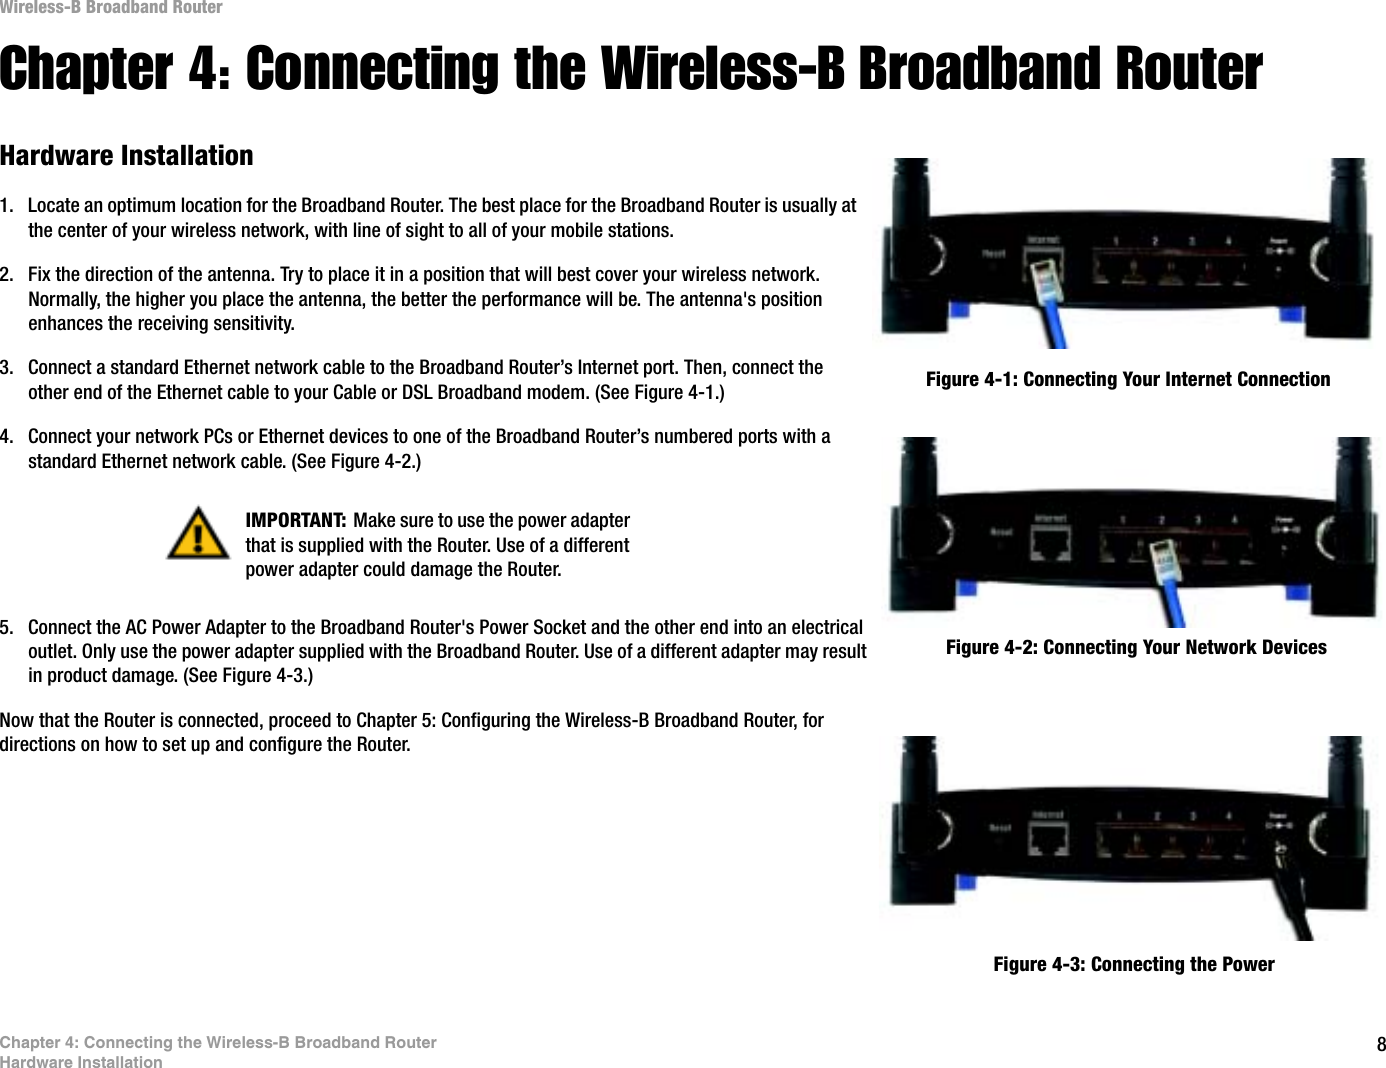 8Chapter 4: Connecting the Wireless-B Broadband RouterHardware InstallationWireless-B Broadband RouterChapter 4: Connecting the Wireless-B Broadband RouterHardware Installation1. Locate an optimum location for the Broadband Router. The best place for the Broadband Router is usually at the center of your wireless network, with line of sight to all of your mobile stations.2. Fix the direction of the antenna. Try to place it in a position that will best cover your wireless network. Normally, the higher you place the antenna, the better the performance will be. The antenna&apos;s position enhances the receiving sensitivity.3. Connect a standard Ethernet network cable to the Broadband Router’s Internet port. Then, connect the other end of the Ethernet cable to your Cable or DSL Broadband modem. (See Figure 4-1.)4. Connect your network PCs or Ethernet devices to one of the Broadband Router’s numbered ports with a standard Ethernet network cable. (See Figure 4-2.)5. Connect the AC Power Adapter to the Broadband Router&apos;s Power Socket and the other end into an electrical outlet. Only use the power adapter supplied with the Broadband Router. Use of a different adapter may result in product damage. (See Figure 4-3.)Now that the Router is connected, proceed to Chapter 5: Configuring the Wireless-B Broadband Router, for directions on how to set up and configure the Router.Figure 4-1: Connecting Your Internet ConnectionFigure 4-2: Connecting Your Network DevicesFigure 4-3: Connecting the PowerIMPORTANT: Make sure to use the power adapter that is supplied with the Router. Use of a different power adapter could damage the Router.